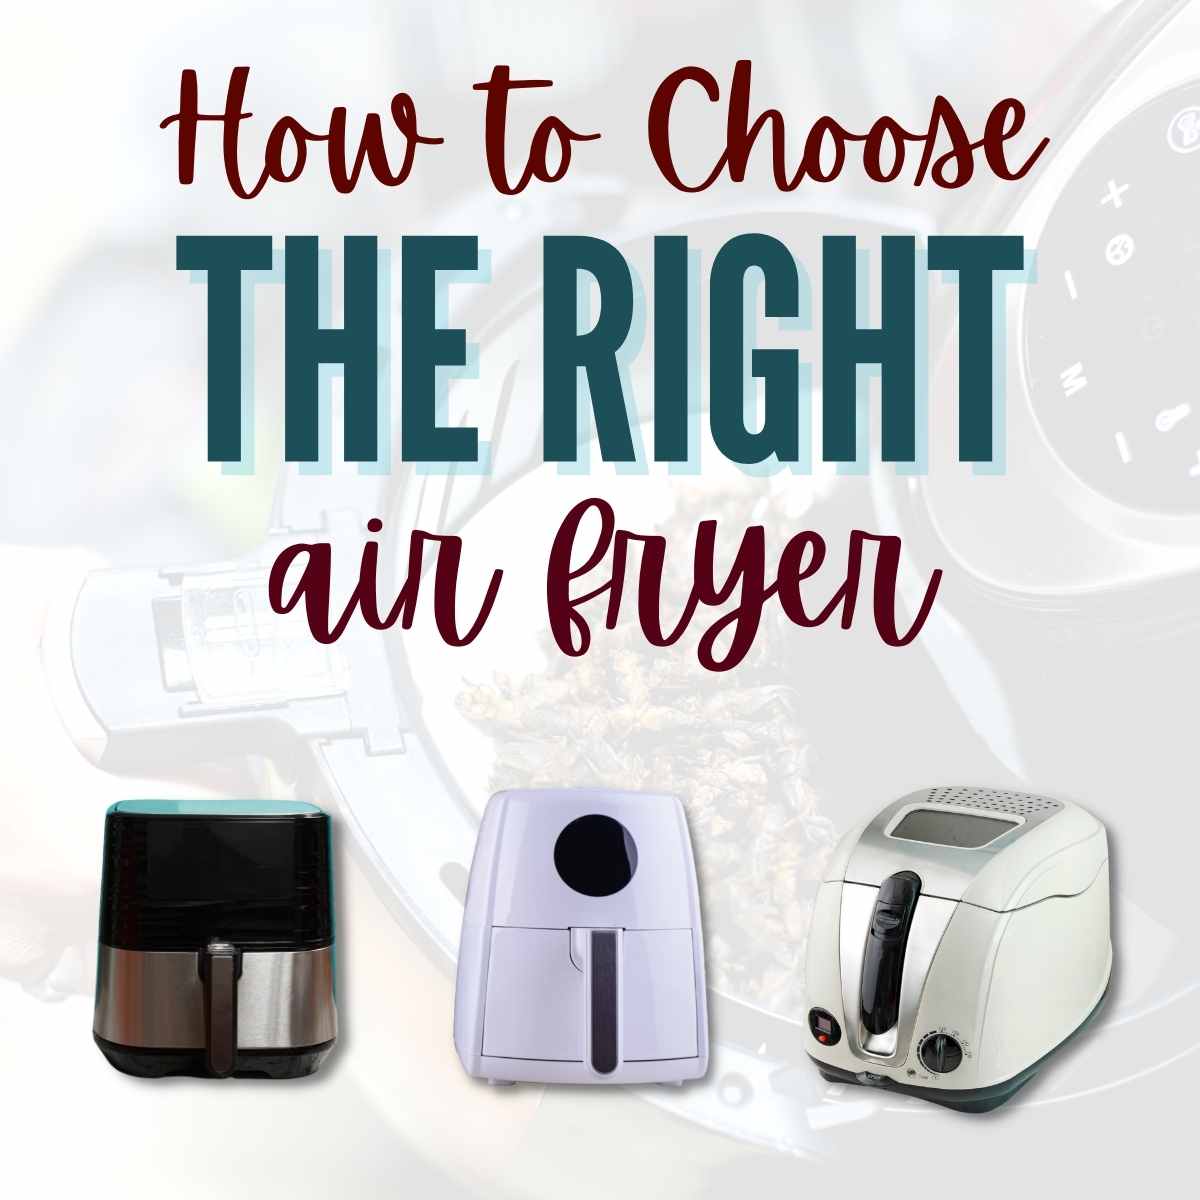 varieties of air fryers with how to choose the right air fryer text